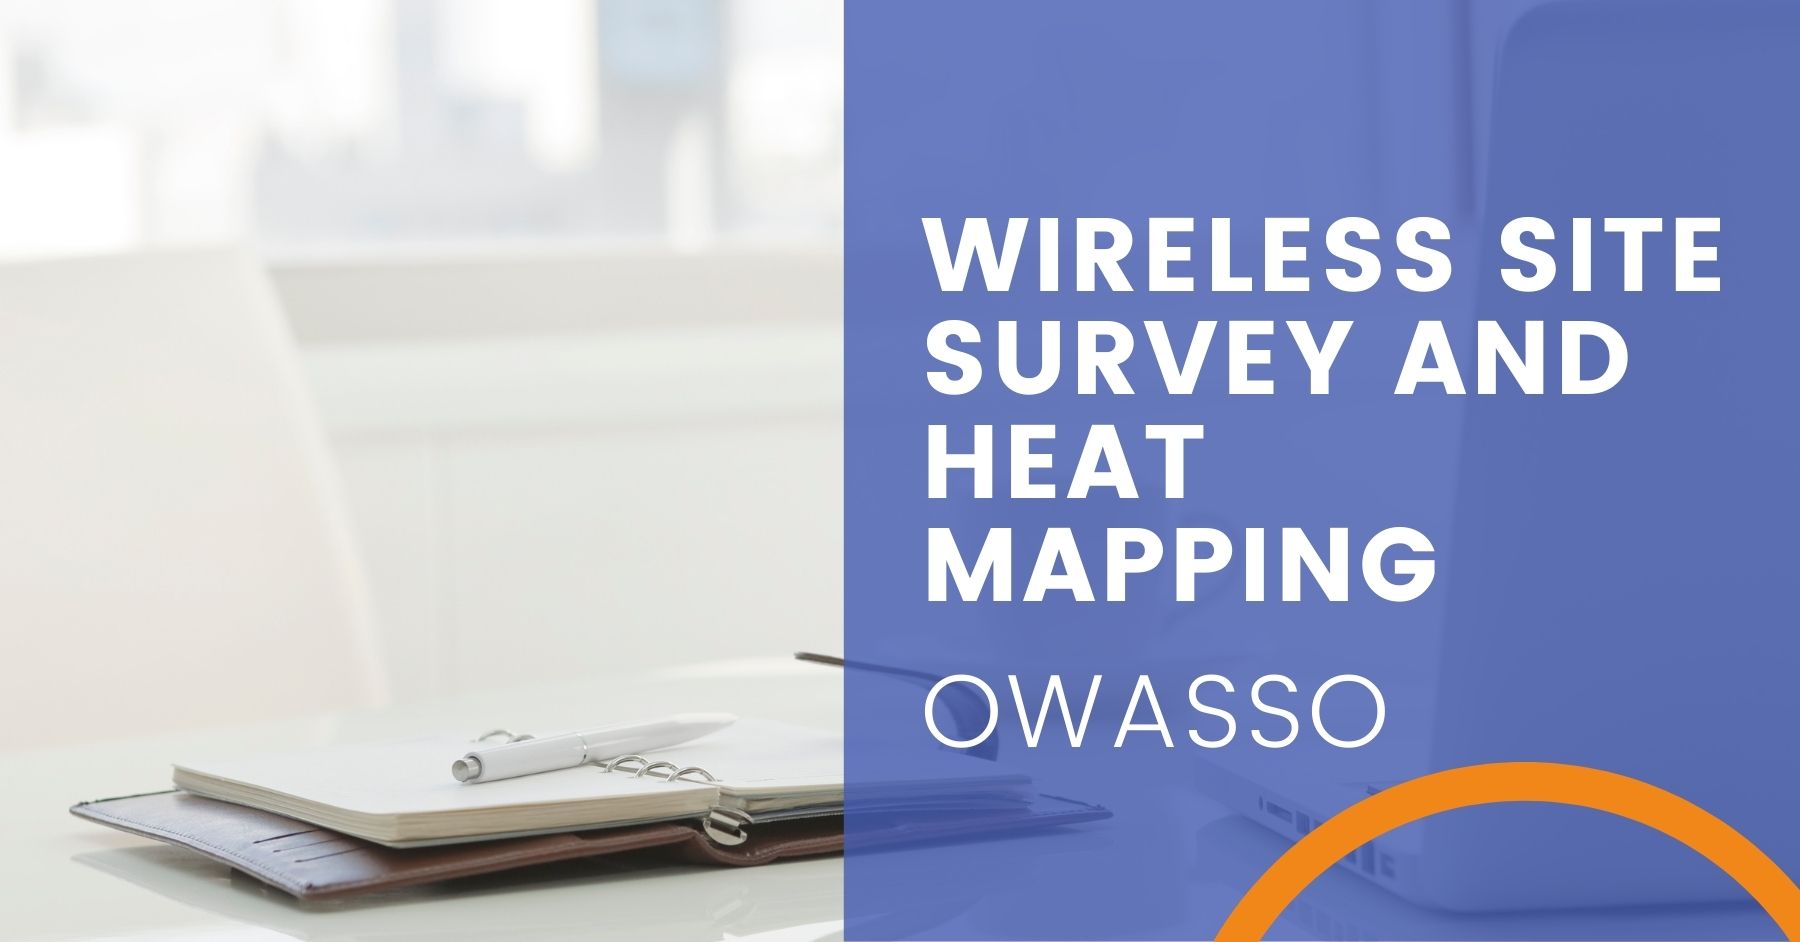 Wireless Site Survey and Heat Mapping in Owasso, Oklahoma